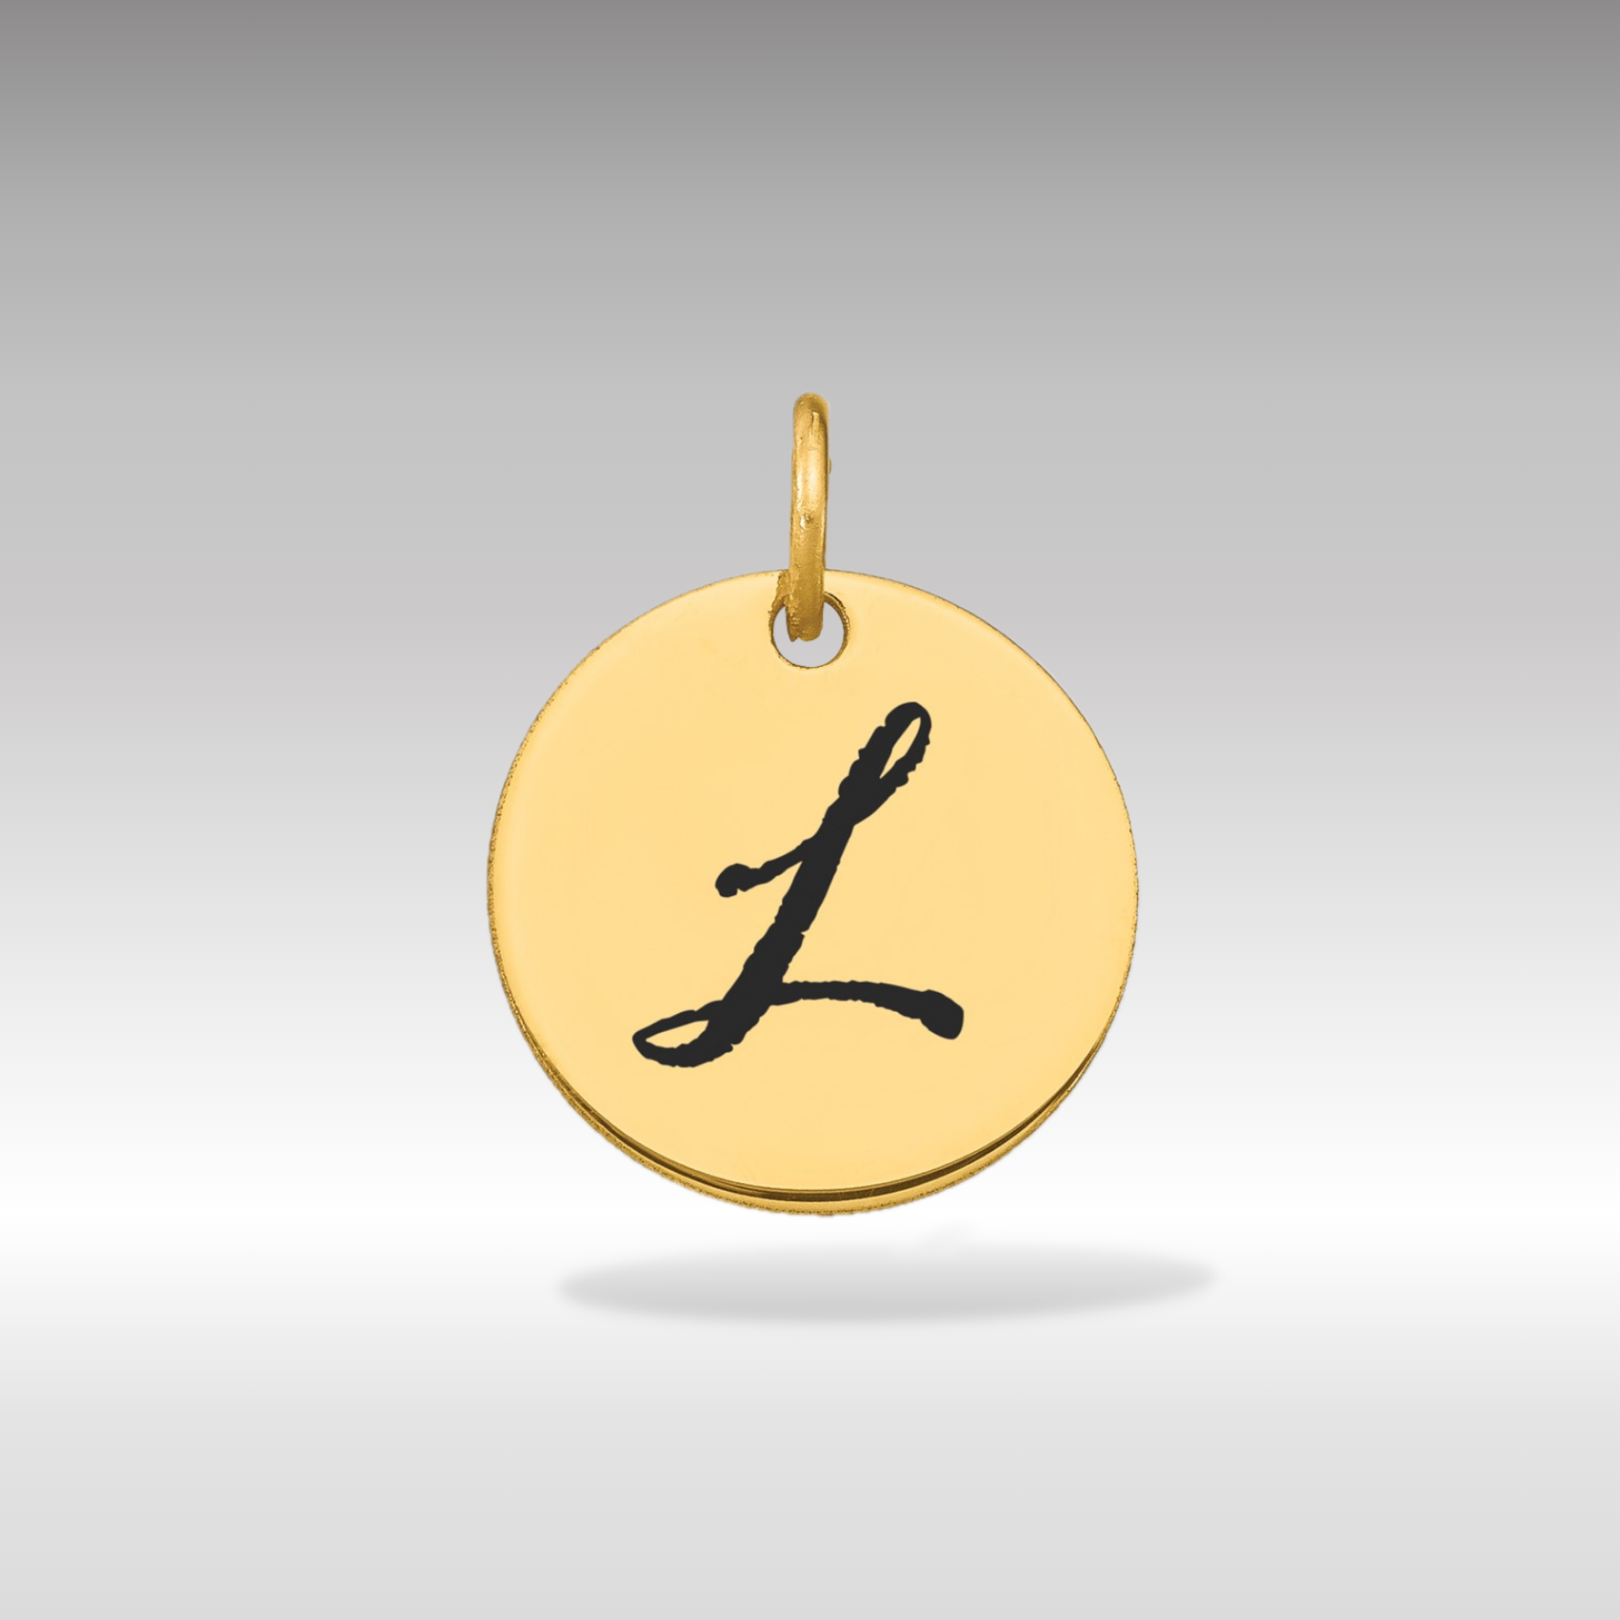 14K Gold Script Letter 'L' Circular Charm with Black Enamel - Charlie & Co. Jewelry